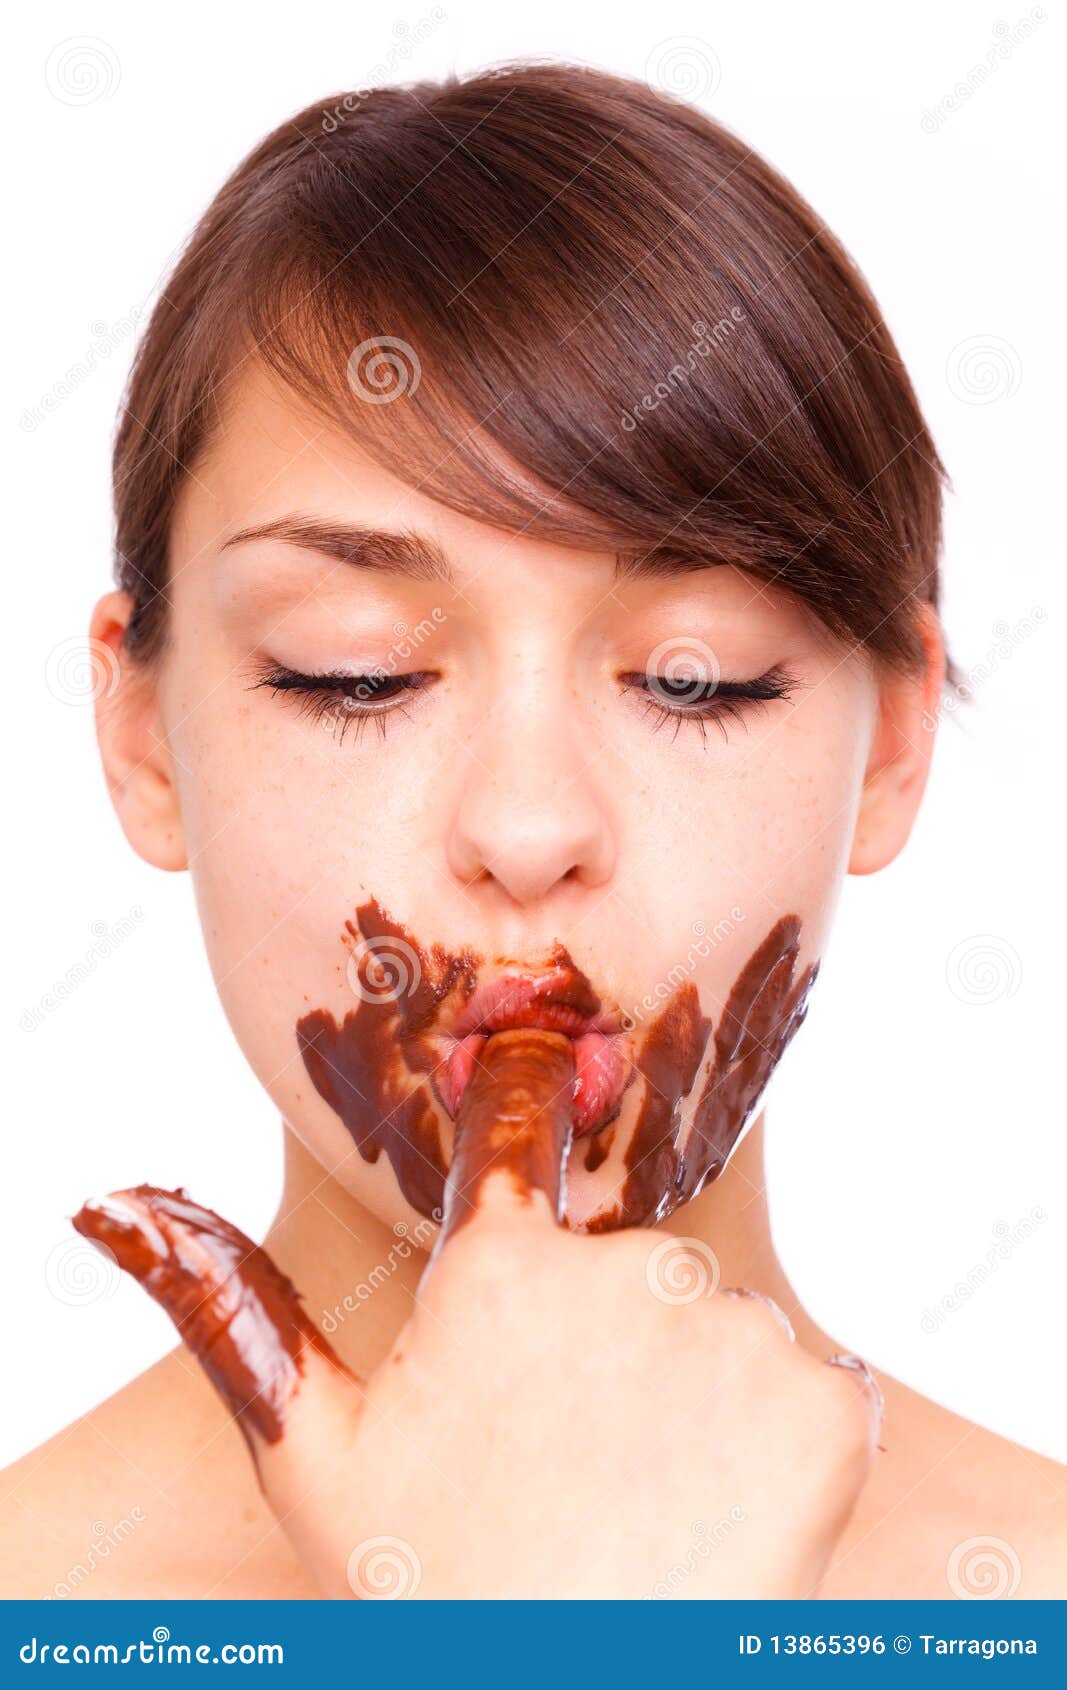 carla darling recommends face full of chocolate pic